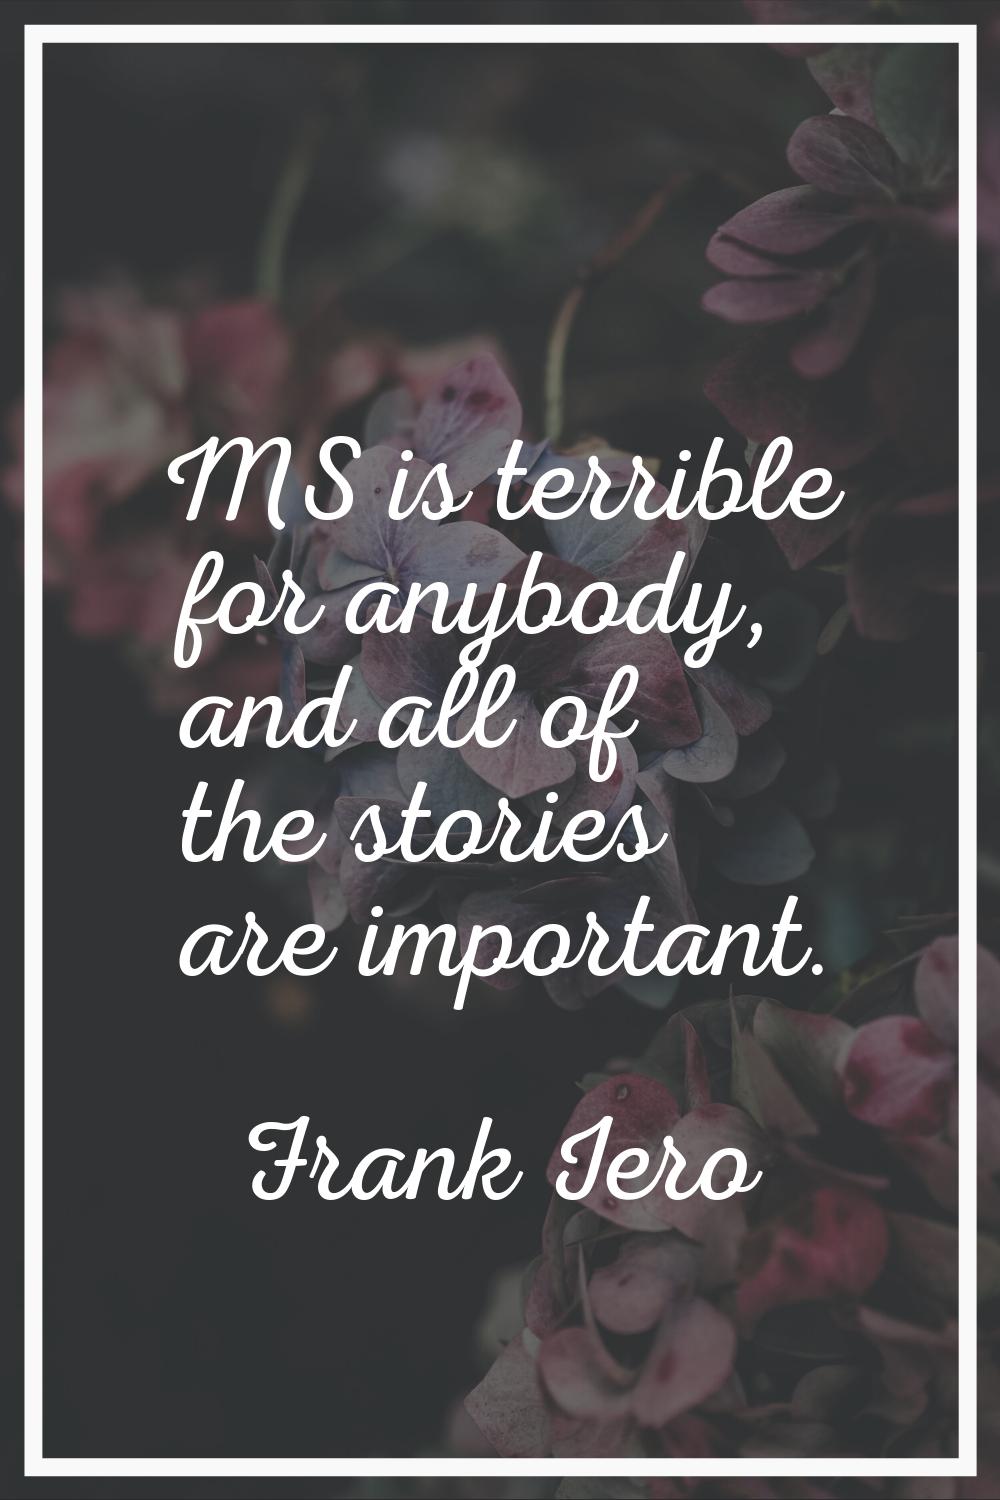 MS is terrible for anybody, and all of the stories are important.